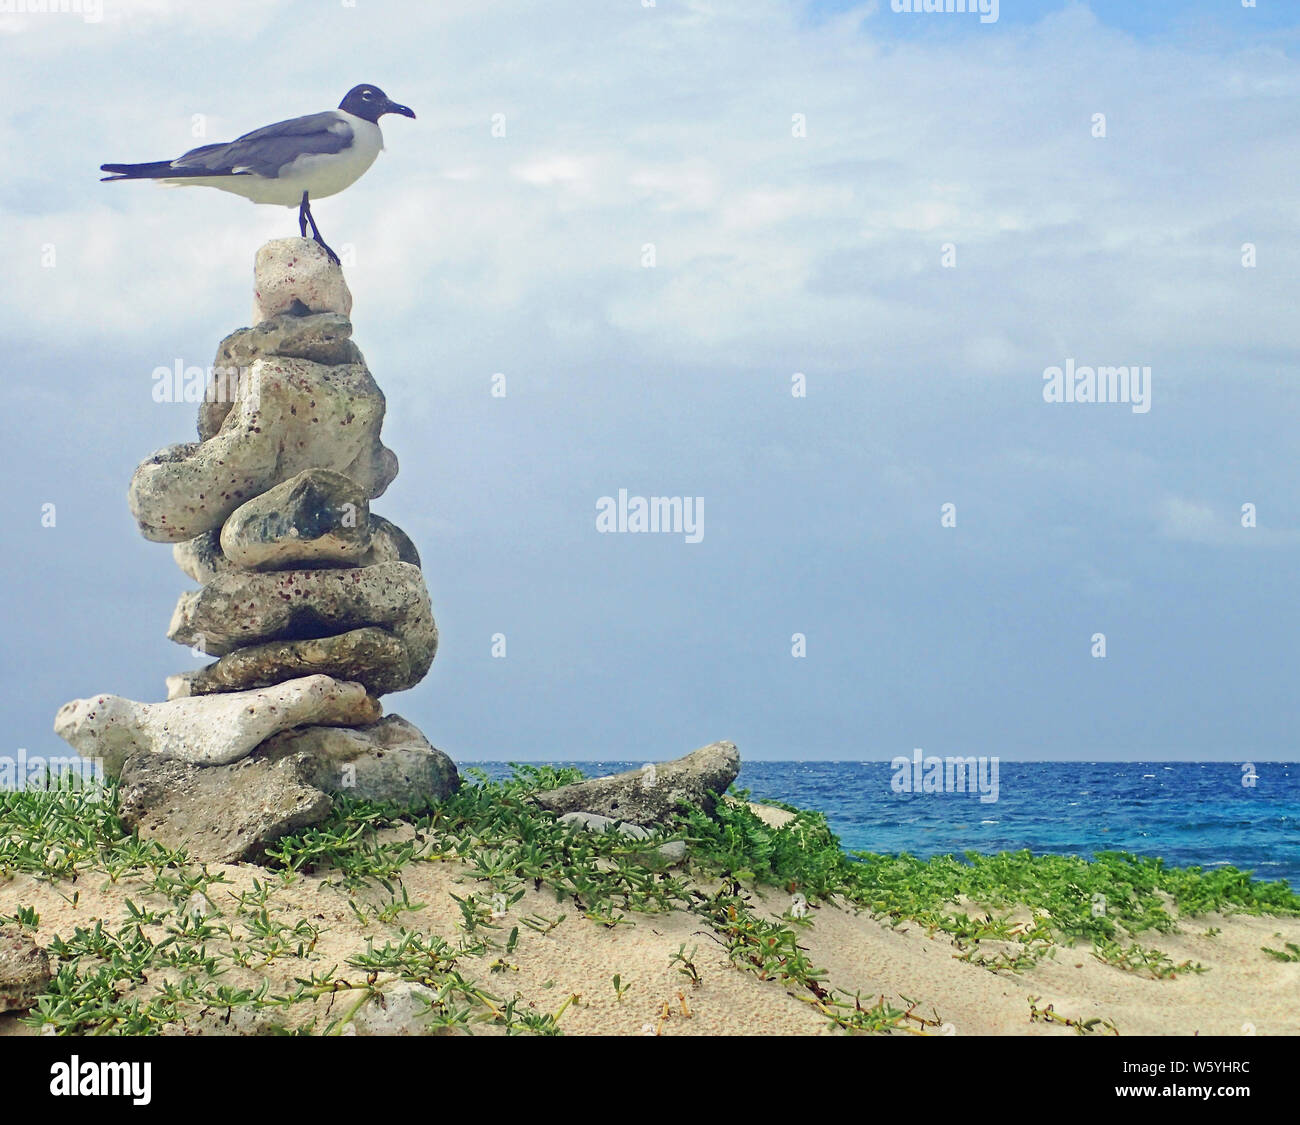 A blue-grey, black and white laughing gull standing on top of a pile of speckled rocks set on a beach scattered with green foliage against a aquamarin Stock Photo